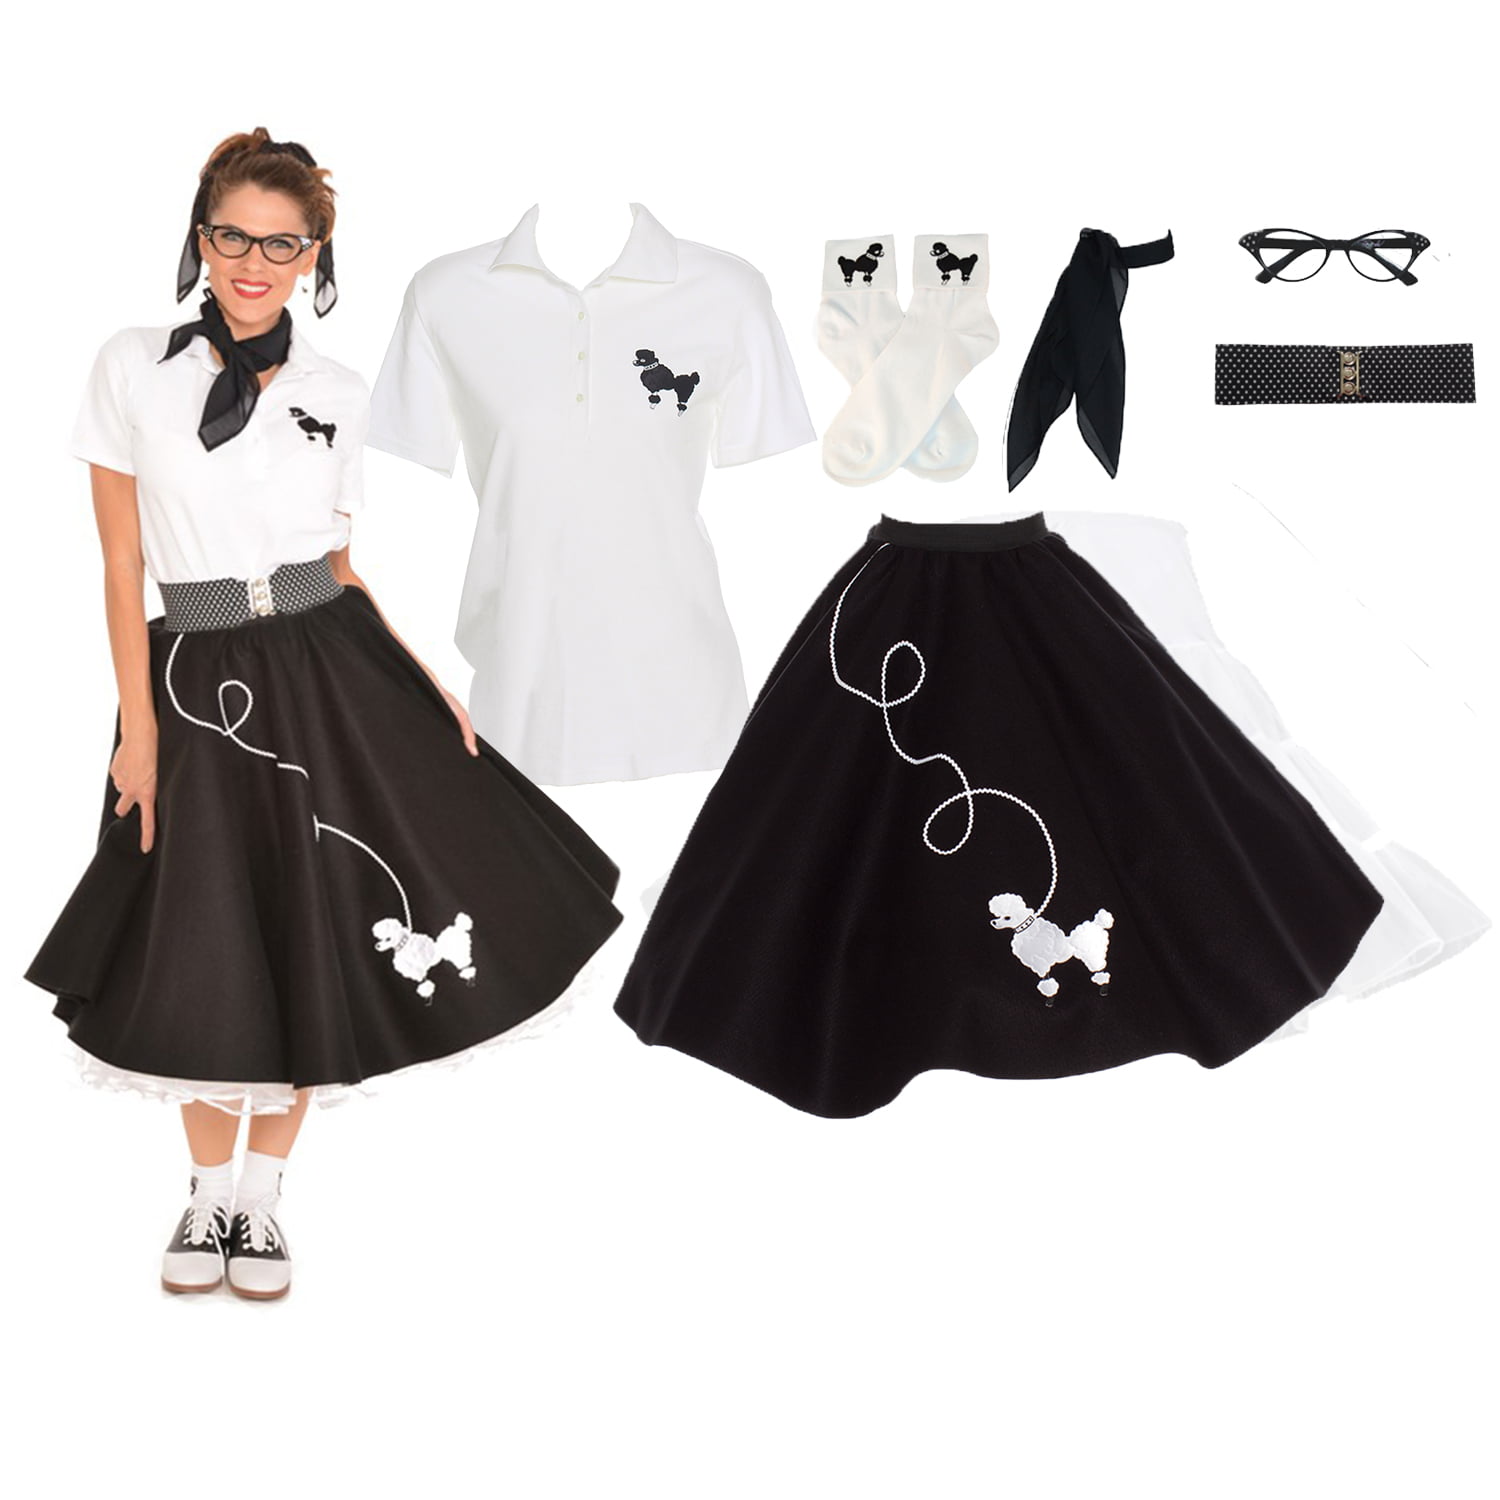 Hip Hop 50s Shop 3 pc Toddler Poodle Skirt Outfit Halloween or Dance Costume 